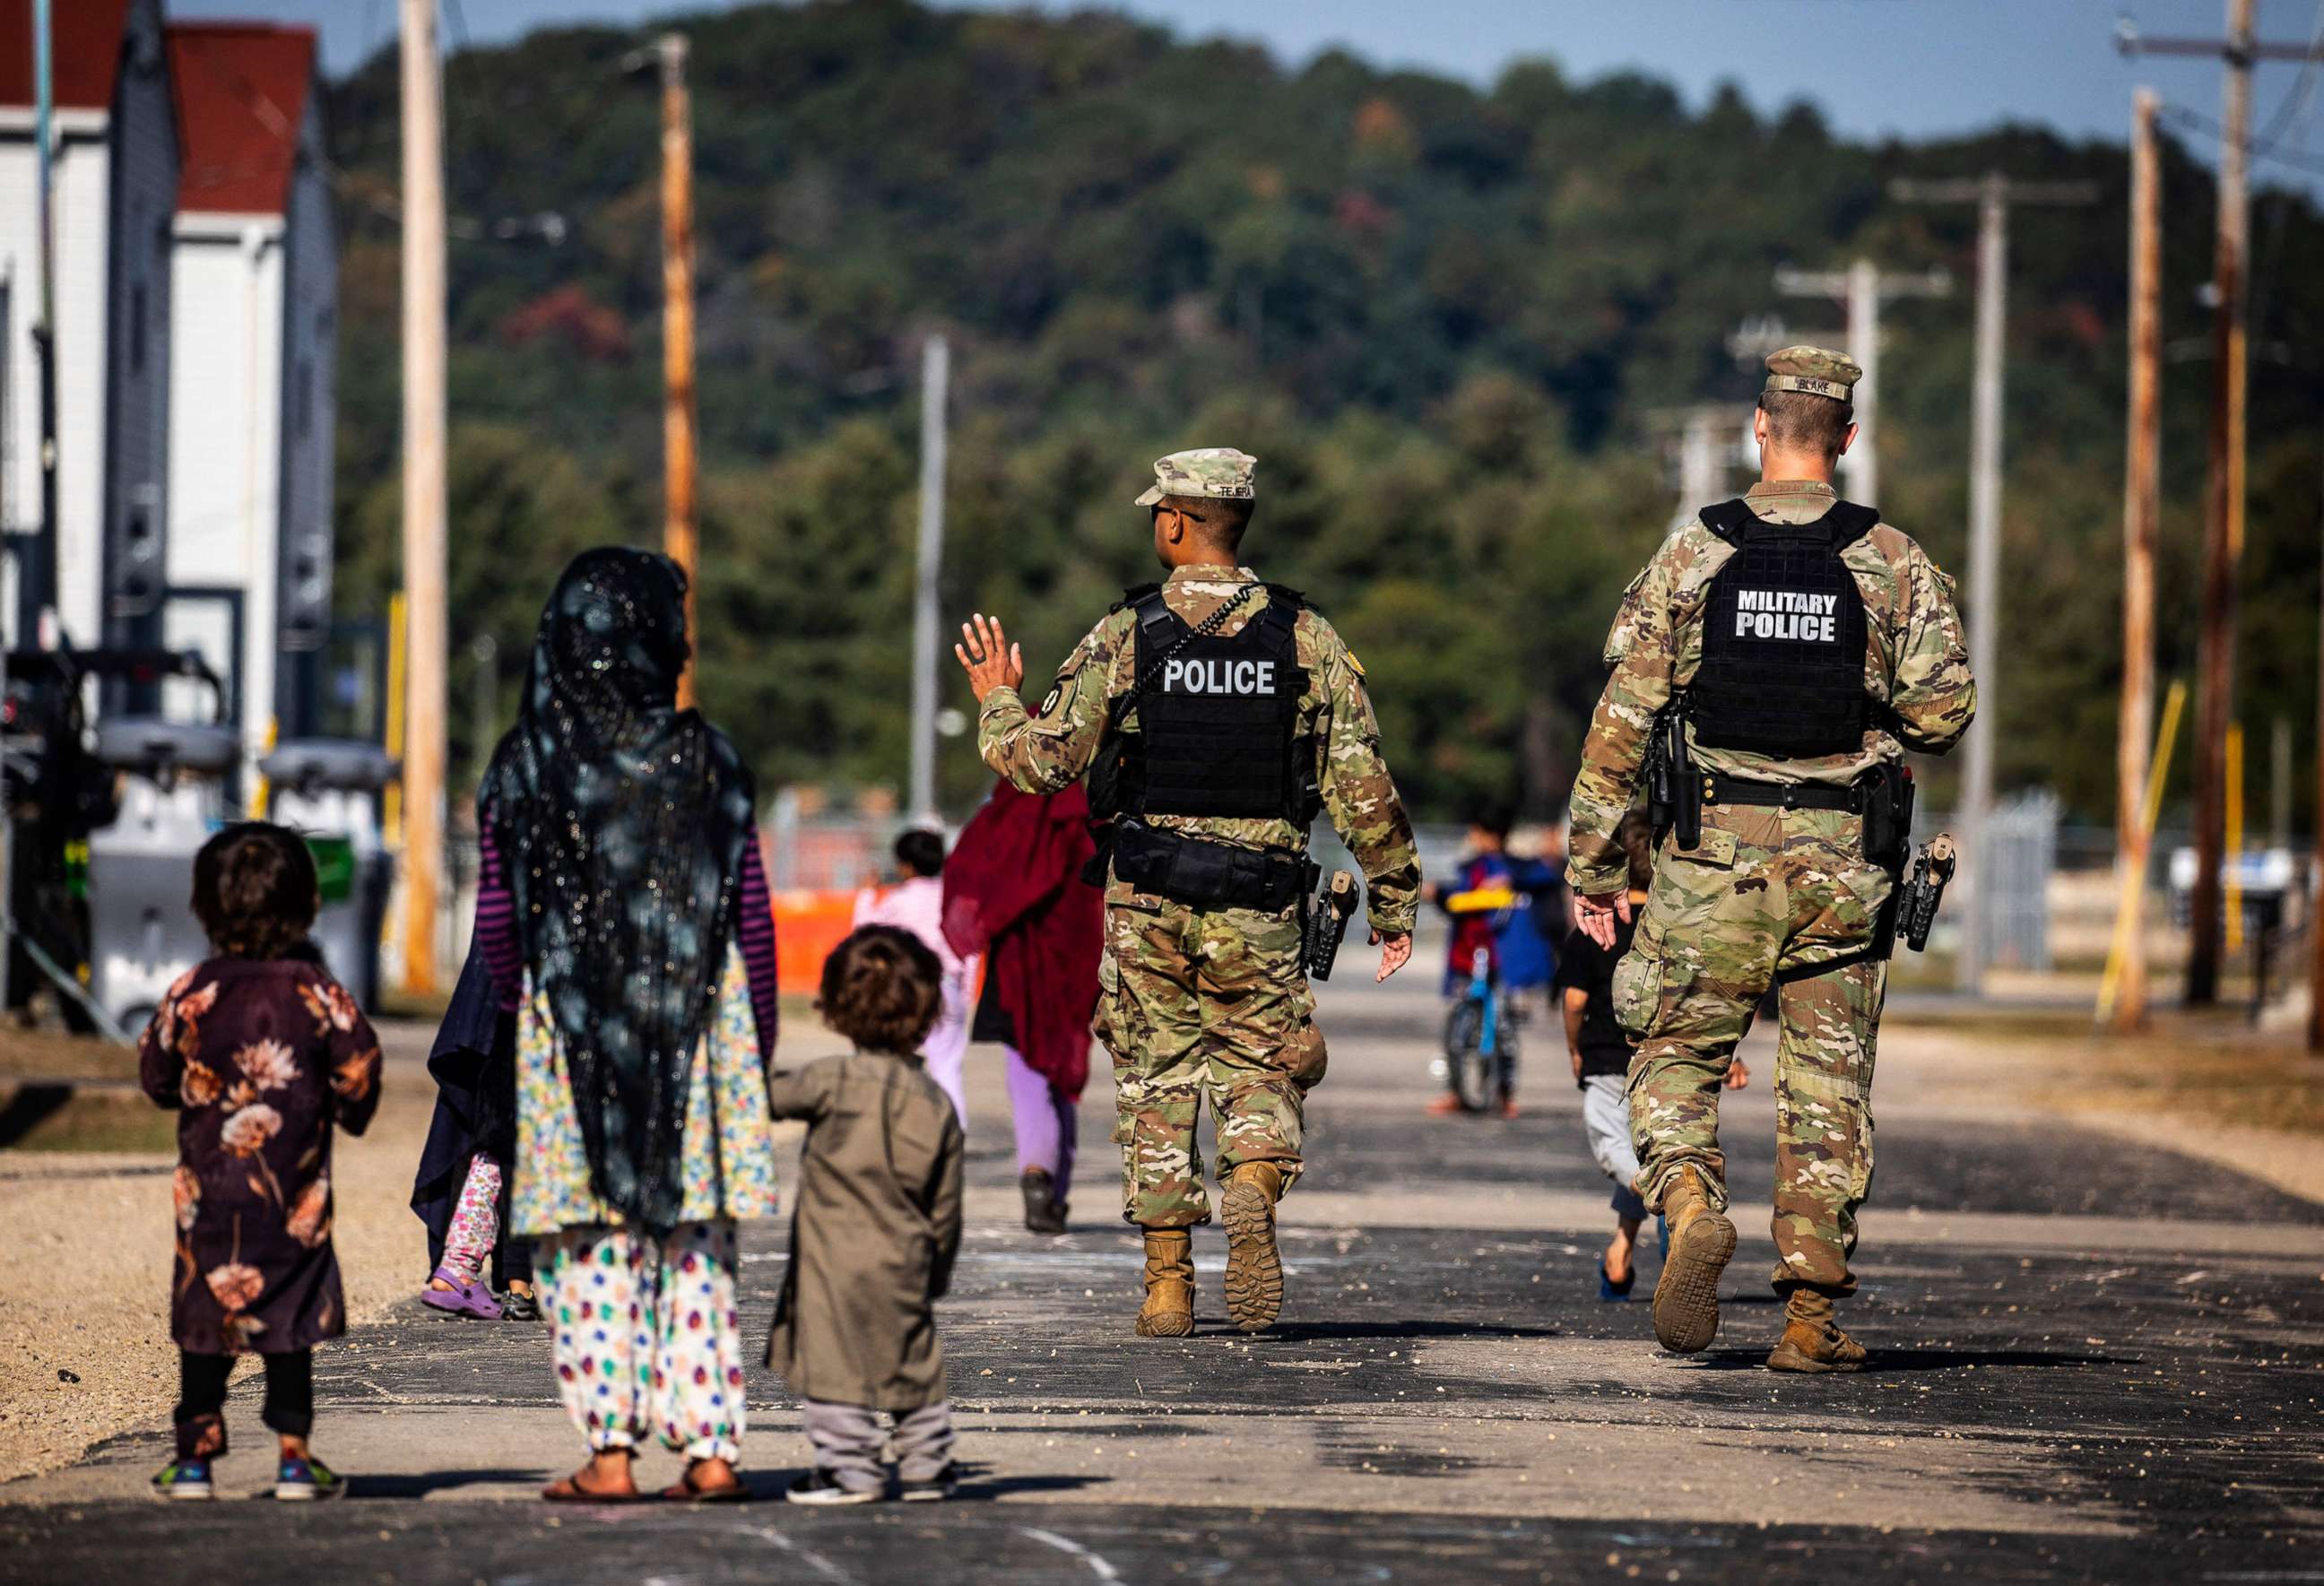 PHOTO: Military Police walk past Afghan refugees at the Village at the Ft. McCoy US Army base, Sept. 30, 2021, in Ft. McCoy, Wisconsin.